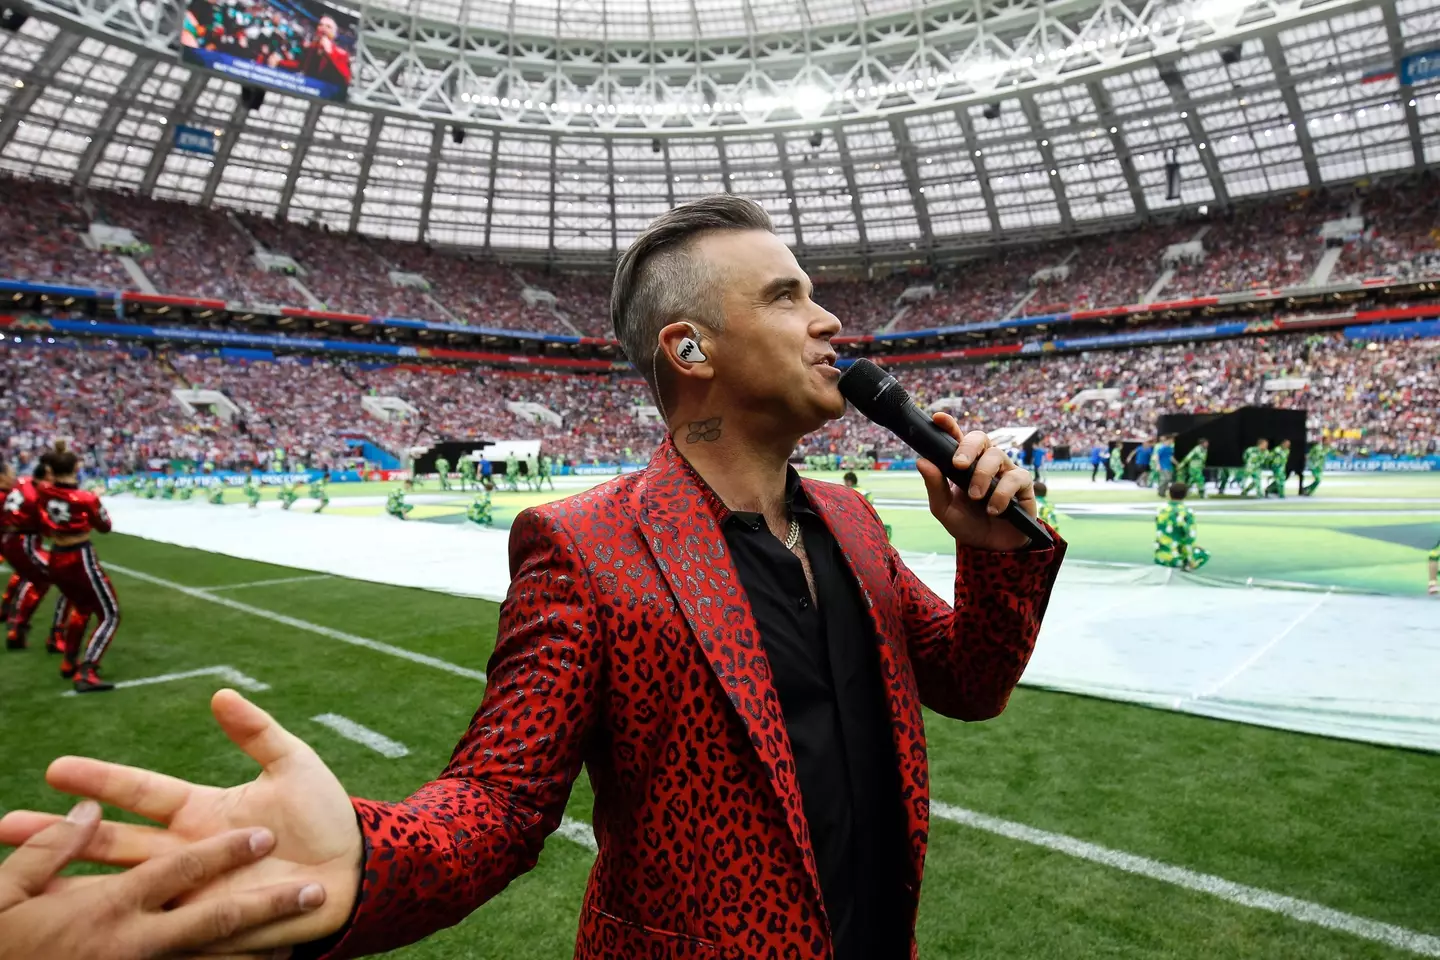 Robbie Williams performing at opening ceremony of 2018 FIFA World Cup in Russia.